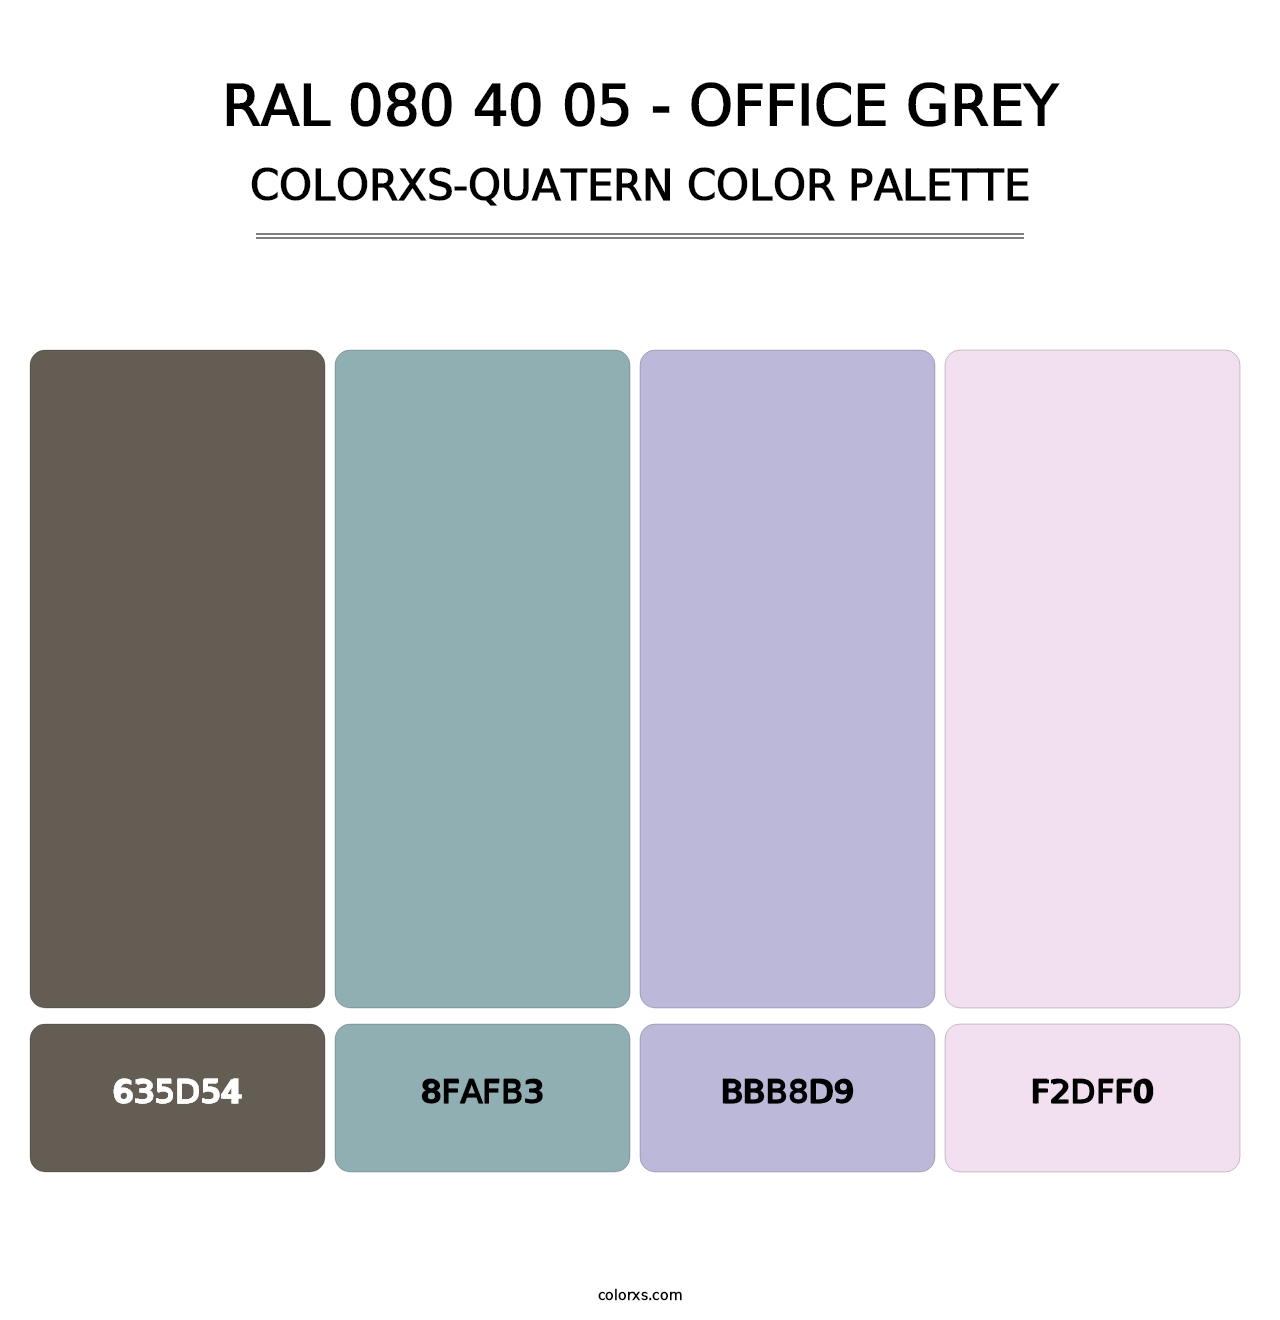 RAL 080 40 05 - Office Grey - Colorxs Quatern Palette